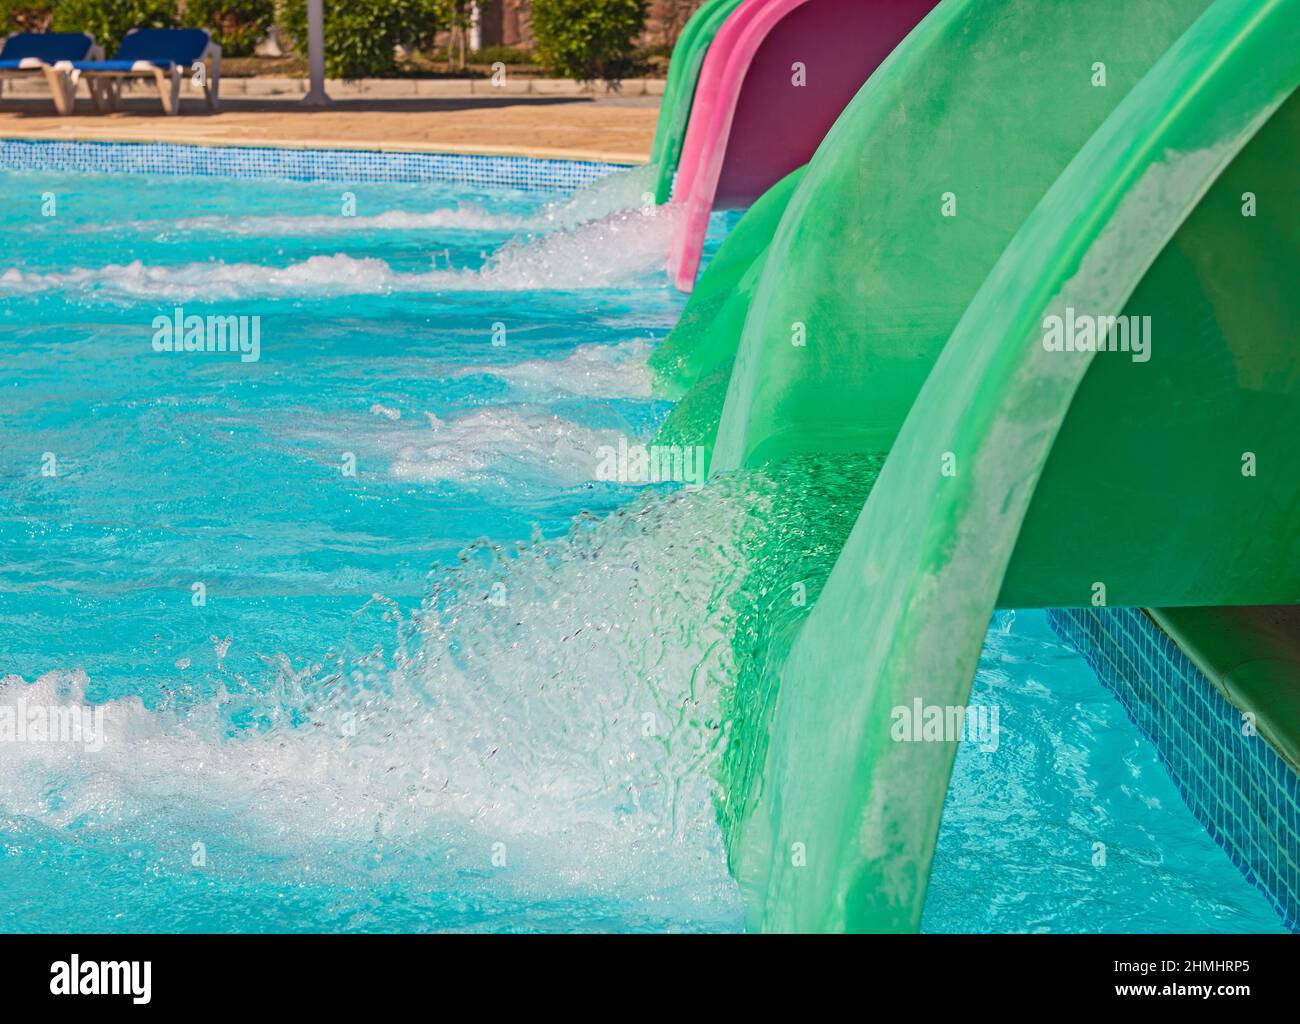 Water entering swimming pool from end of aqua park slide creating splash motion abstract effect Stock Photo